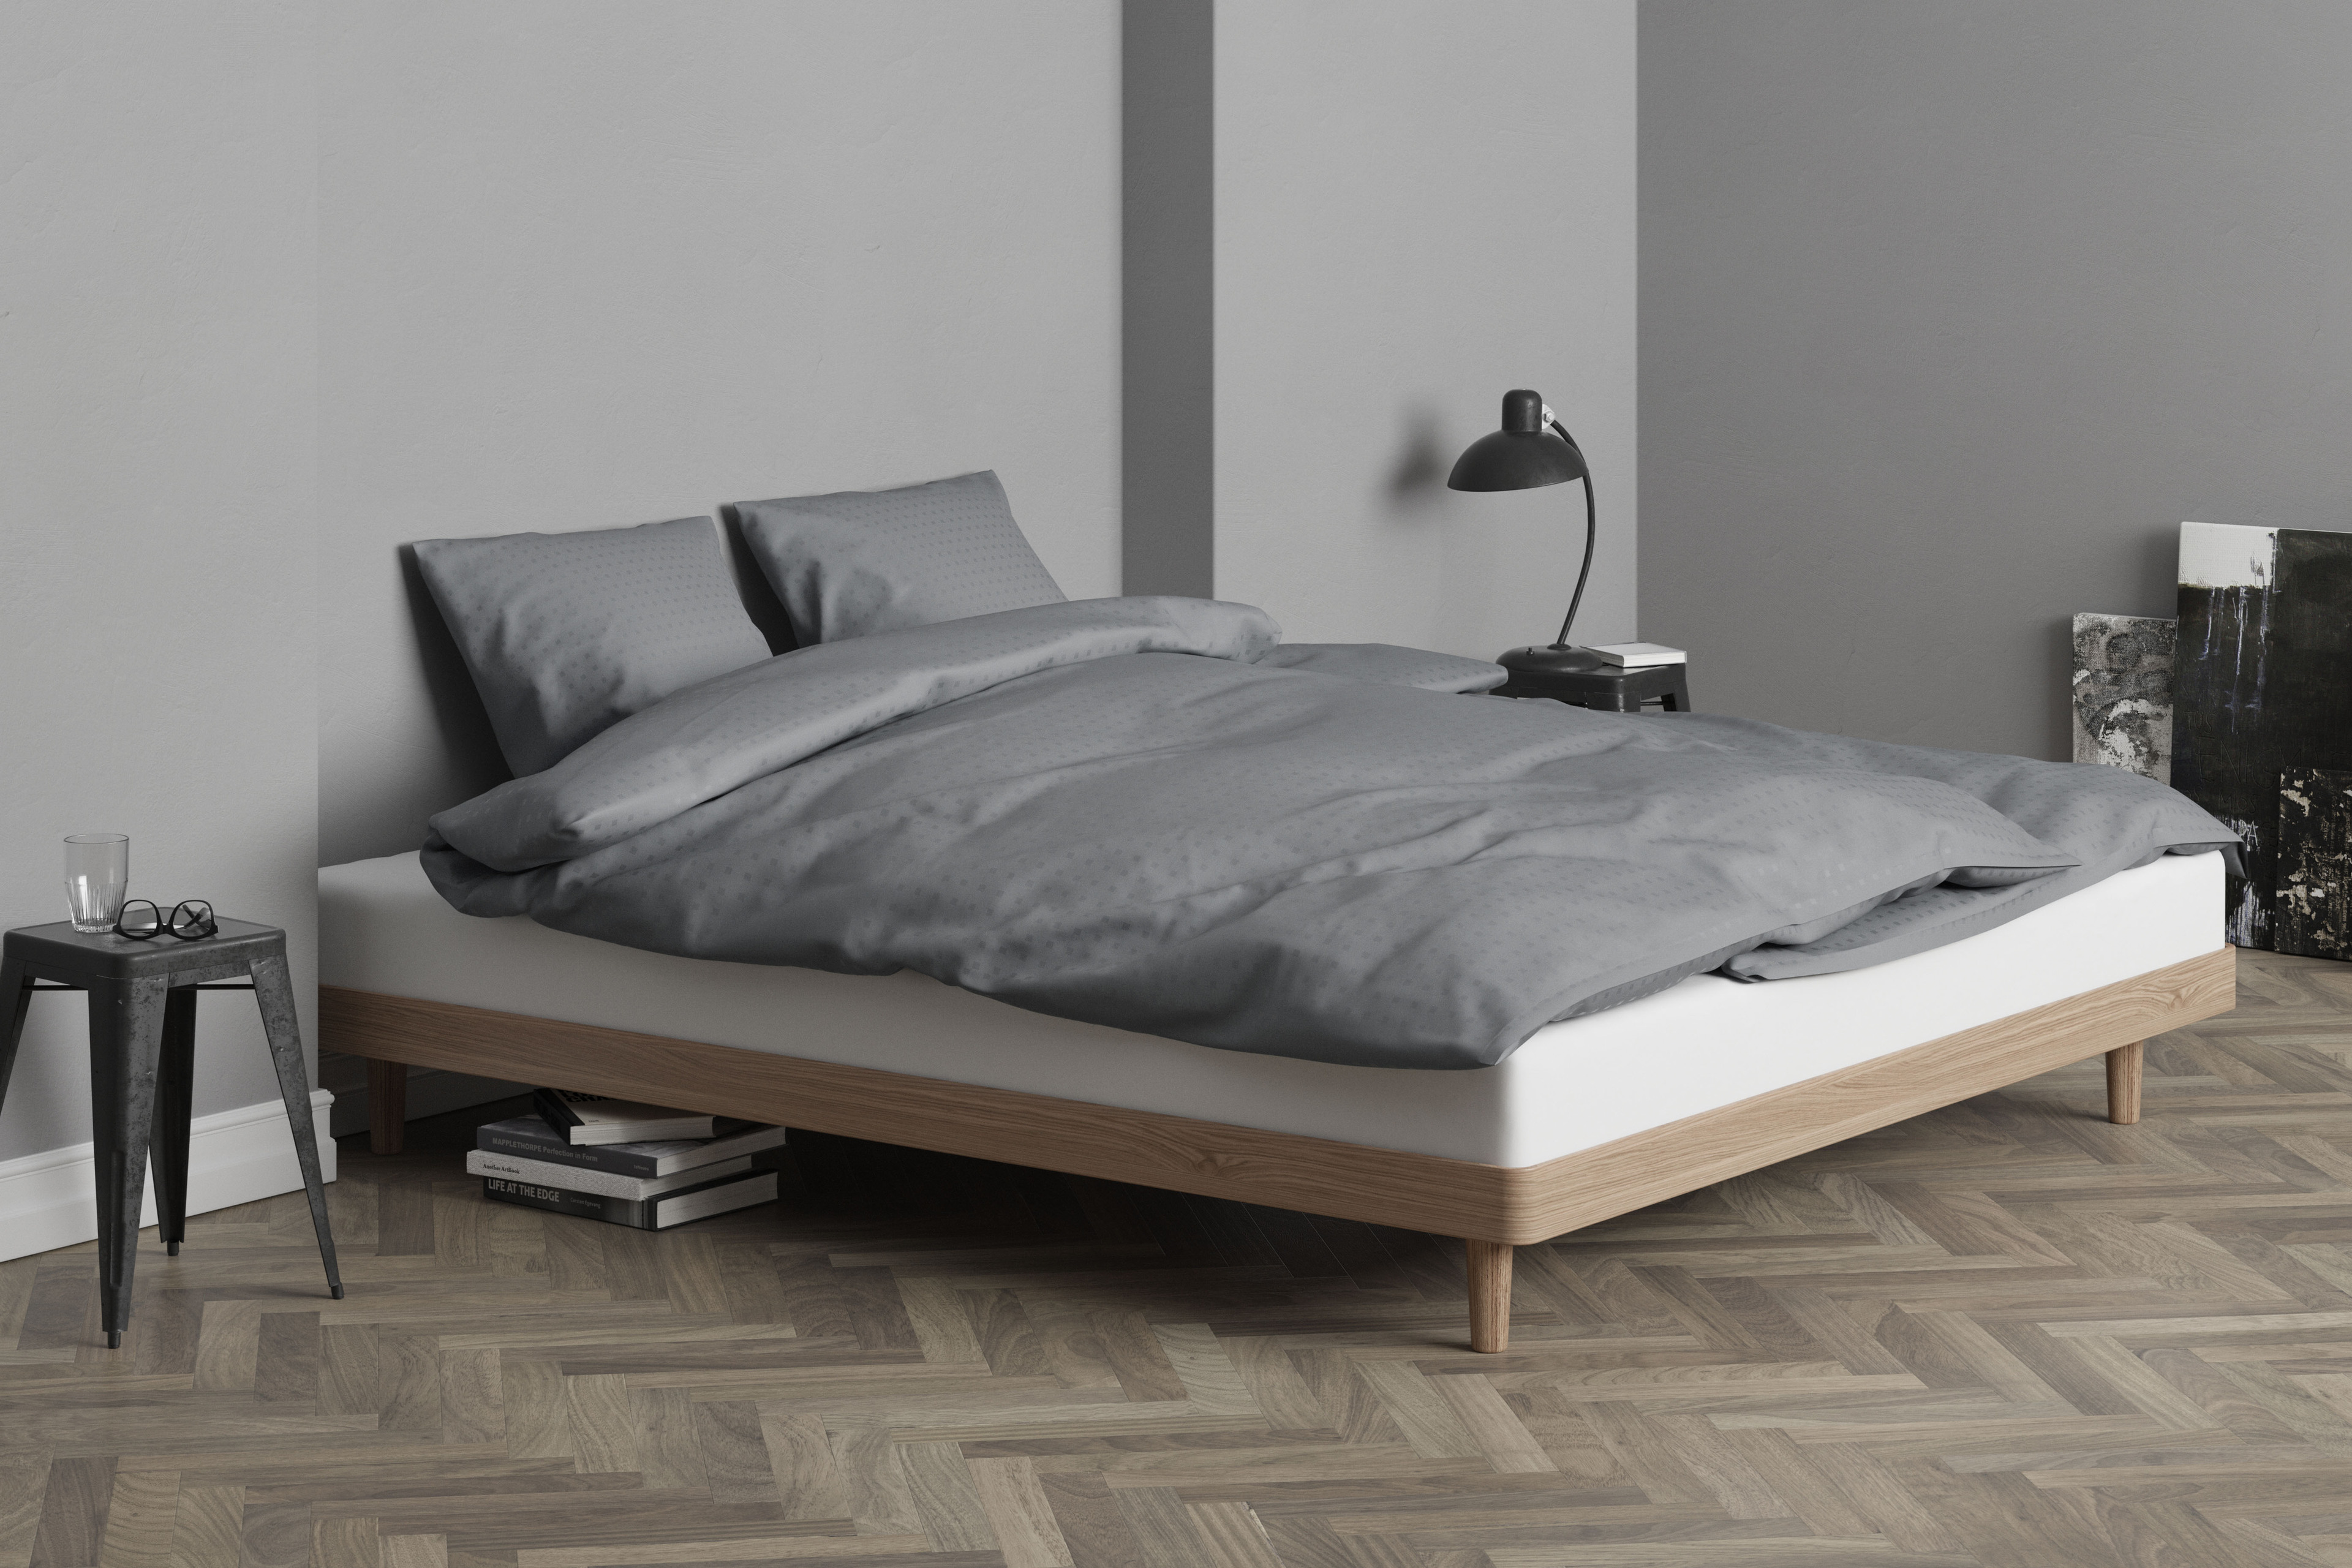 Grey bedding from the JUNA Cube series